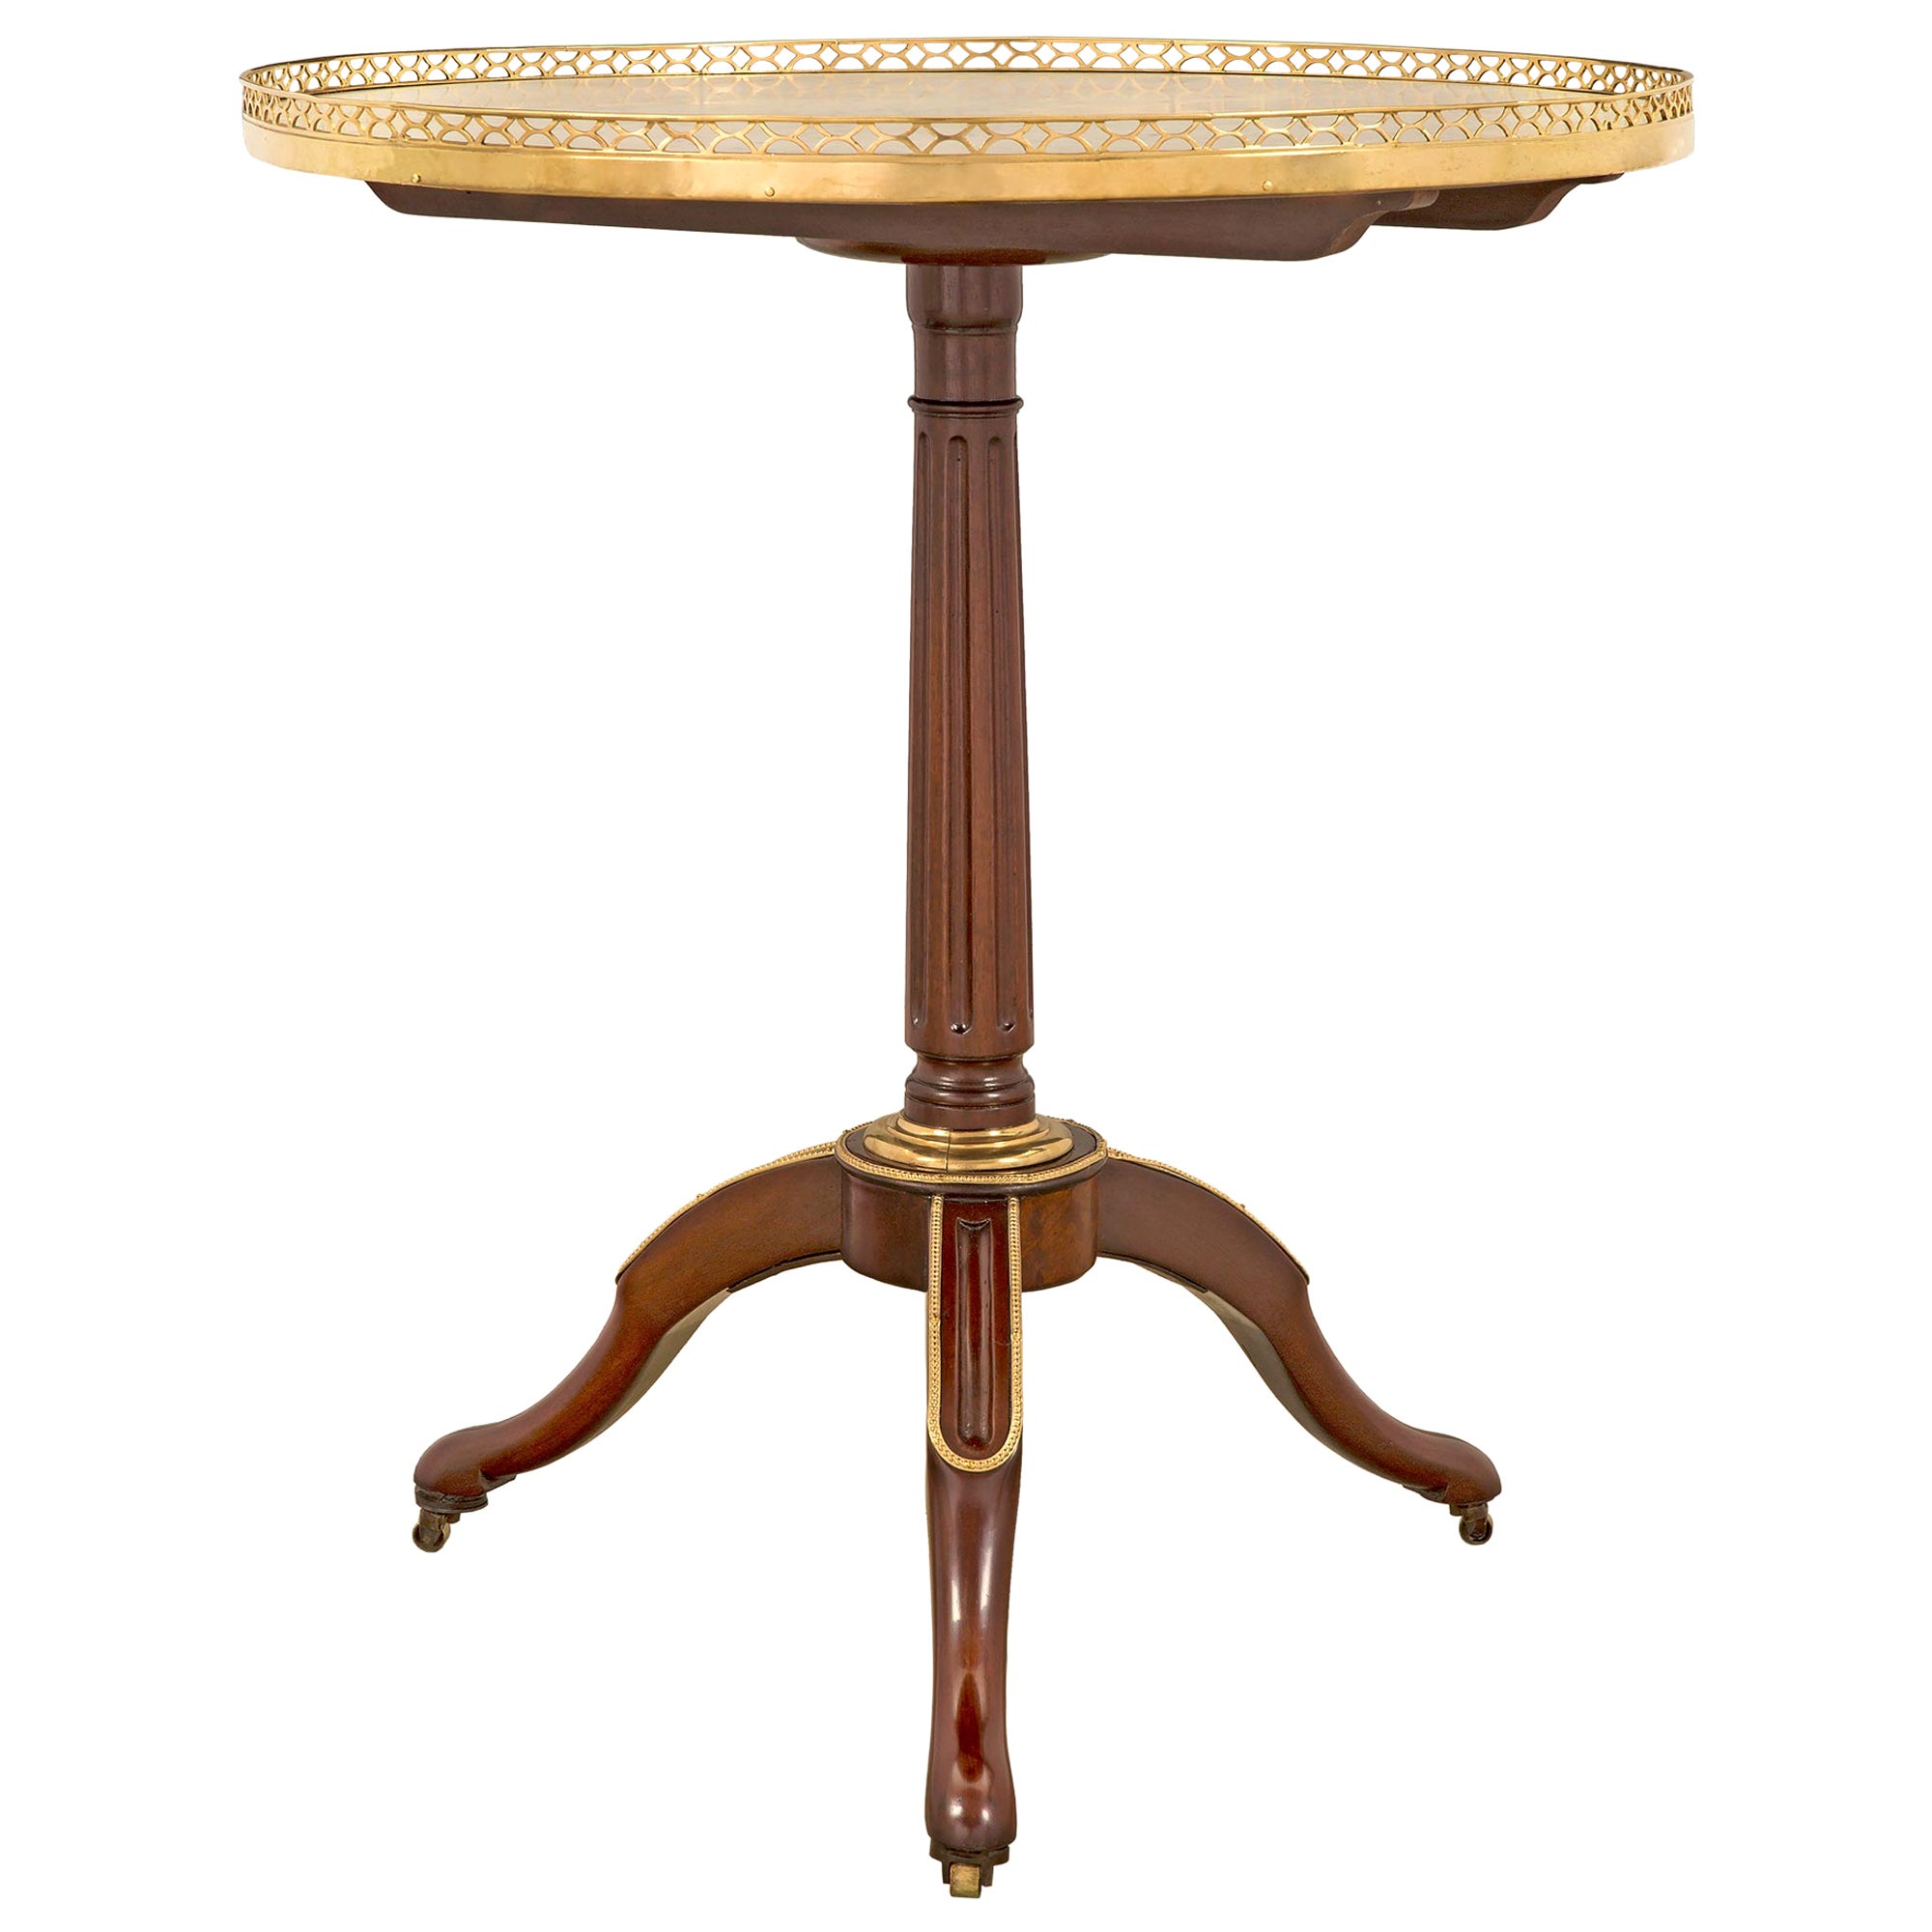 French 18th Century Louis XVI Period Mahogany, Ormolu and Marble Side Table For Sale